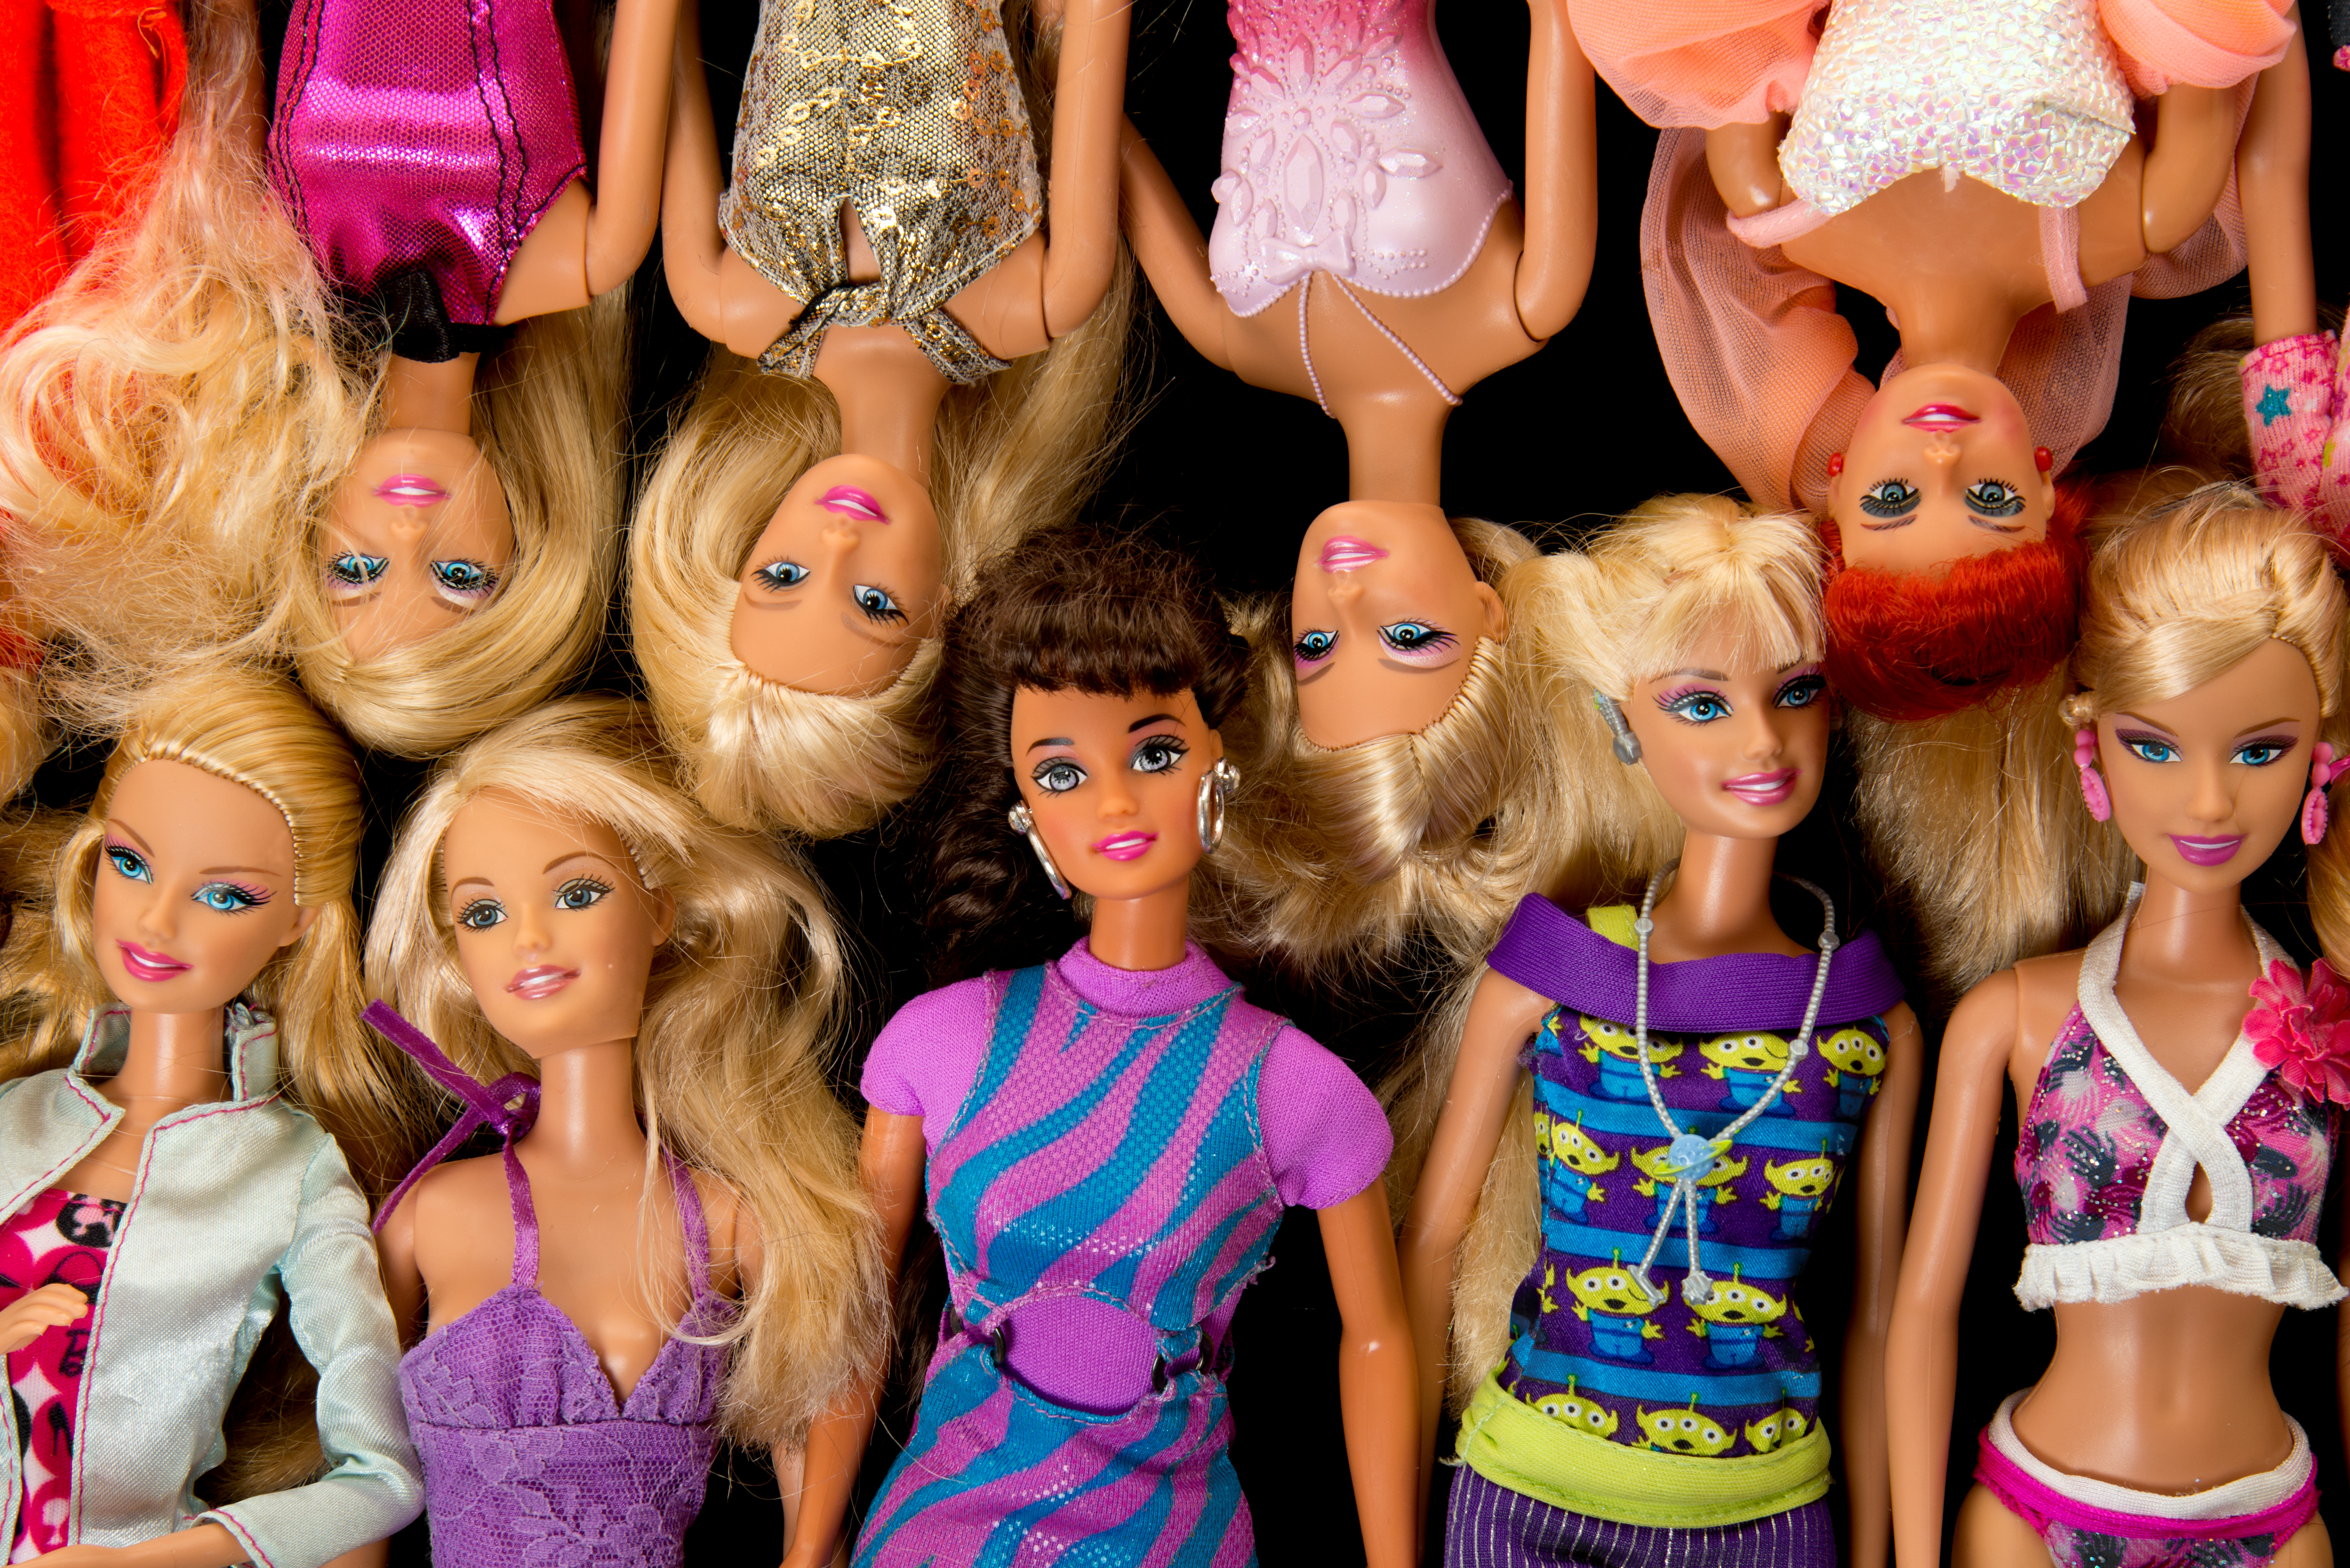 where can you buy barbie dolls